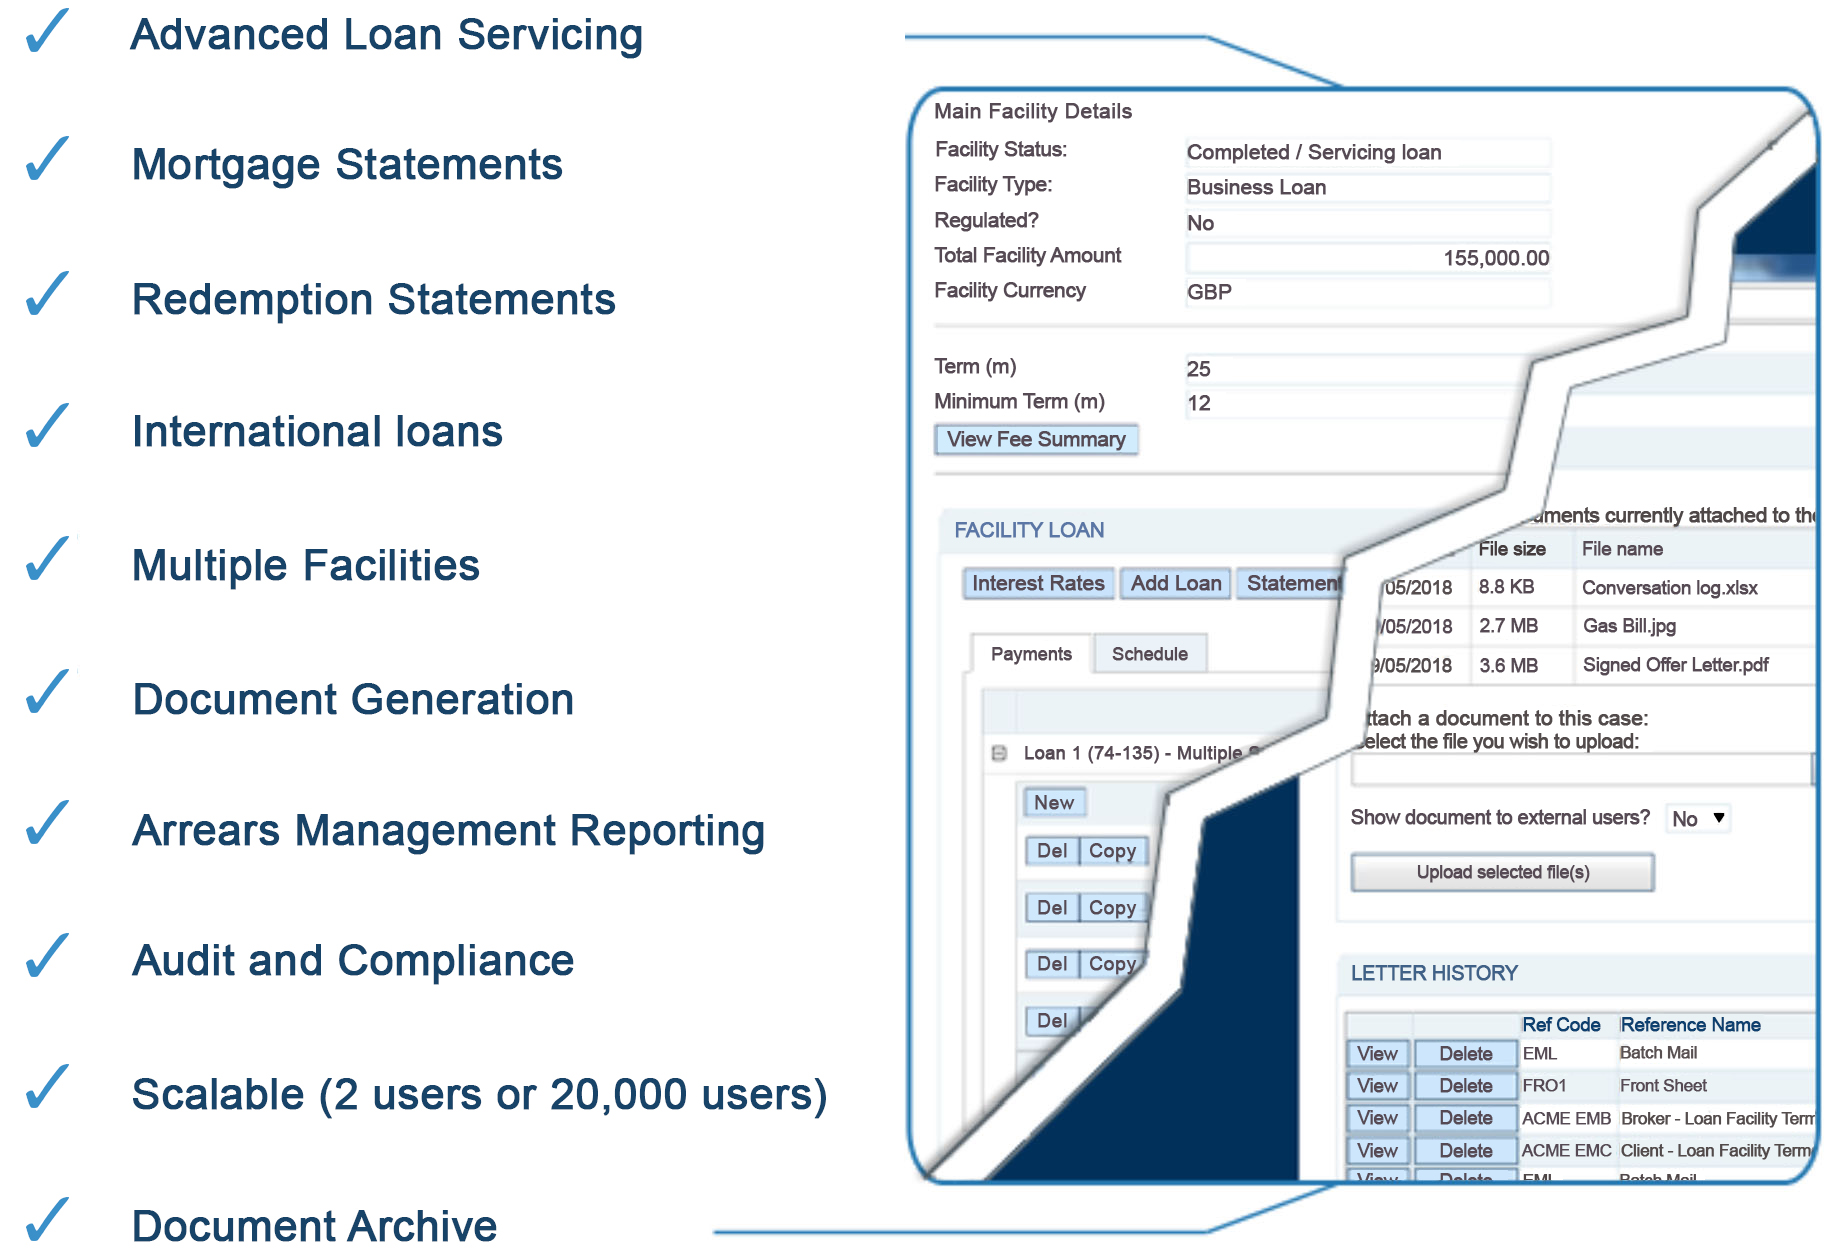 Lender overview additional features